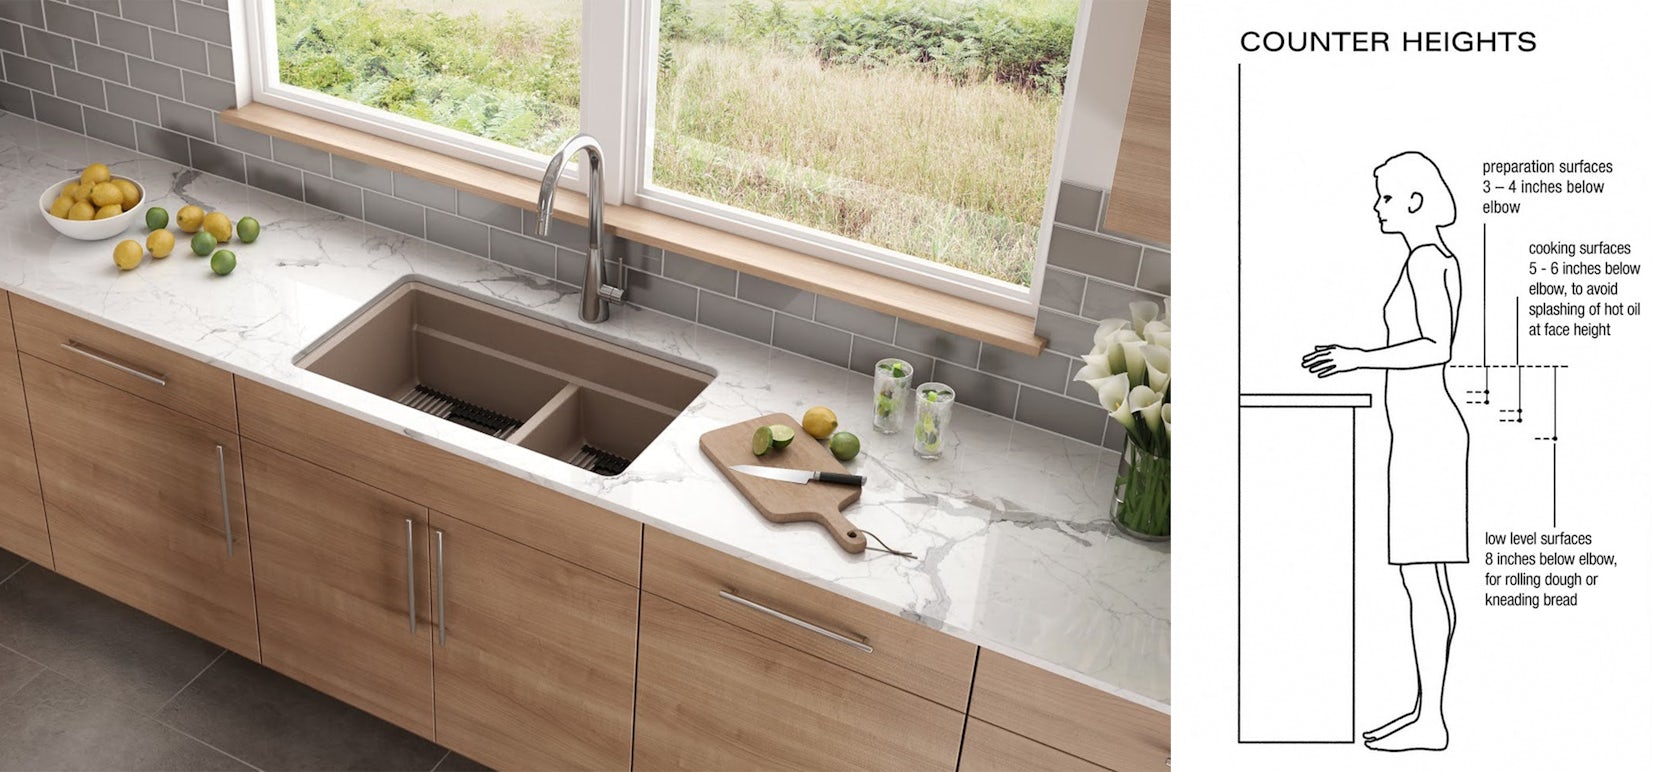 How to Select an Ergonomic Kitchen Sink for Your Individual Needs ...